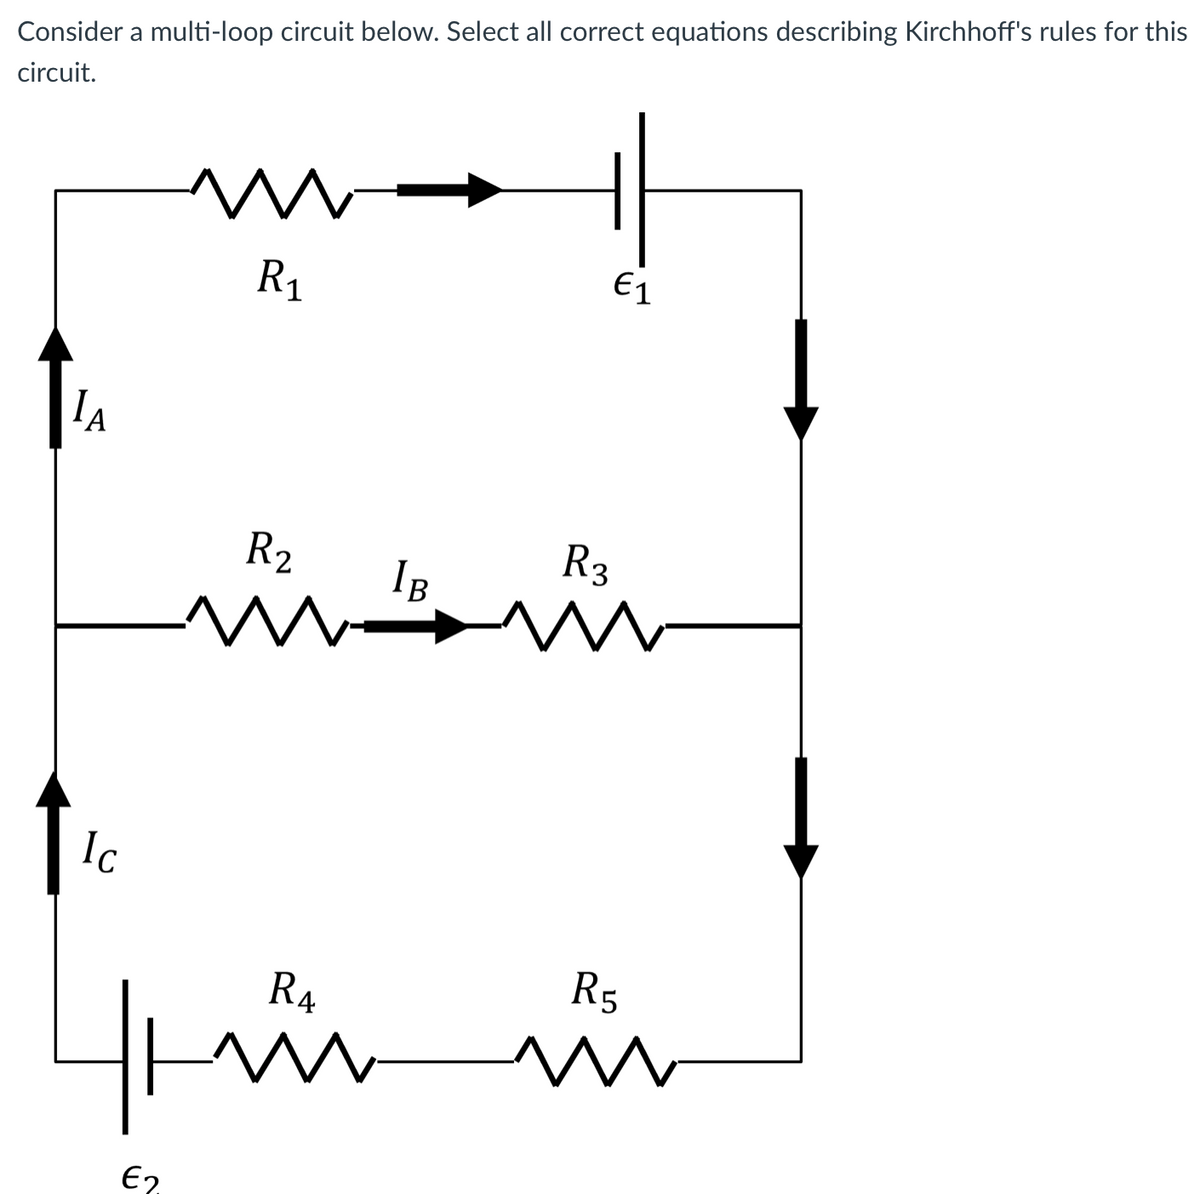 Consider a multi-loop circuit below. Select all correct equations describing Kirchhoff's rules for this
circuit.
- M-
E1
R1
R2
R3
IB
Ic
R5
R4
in
E2
